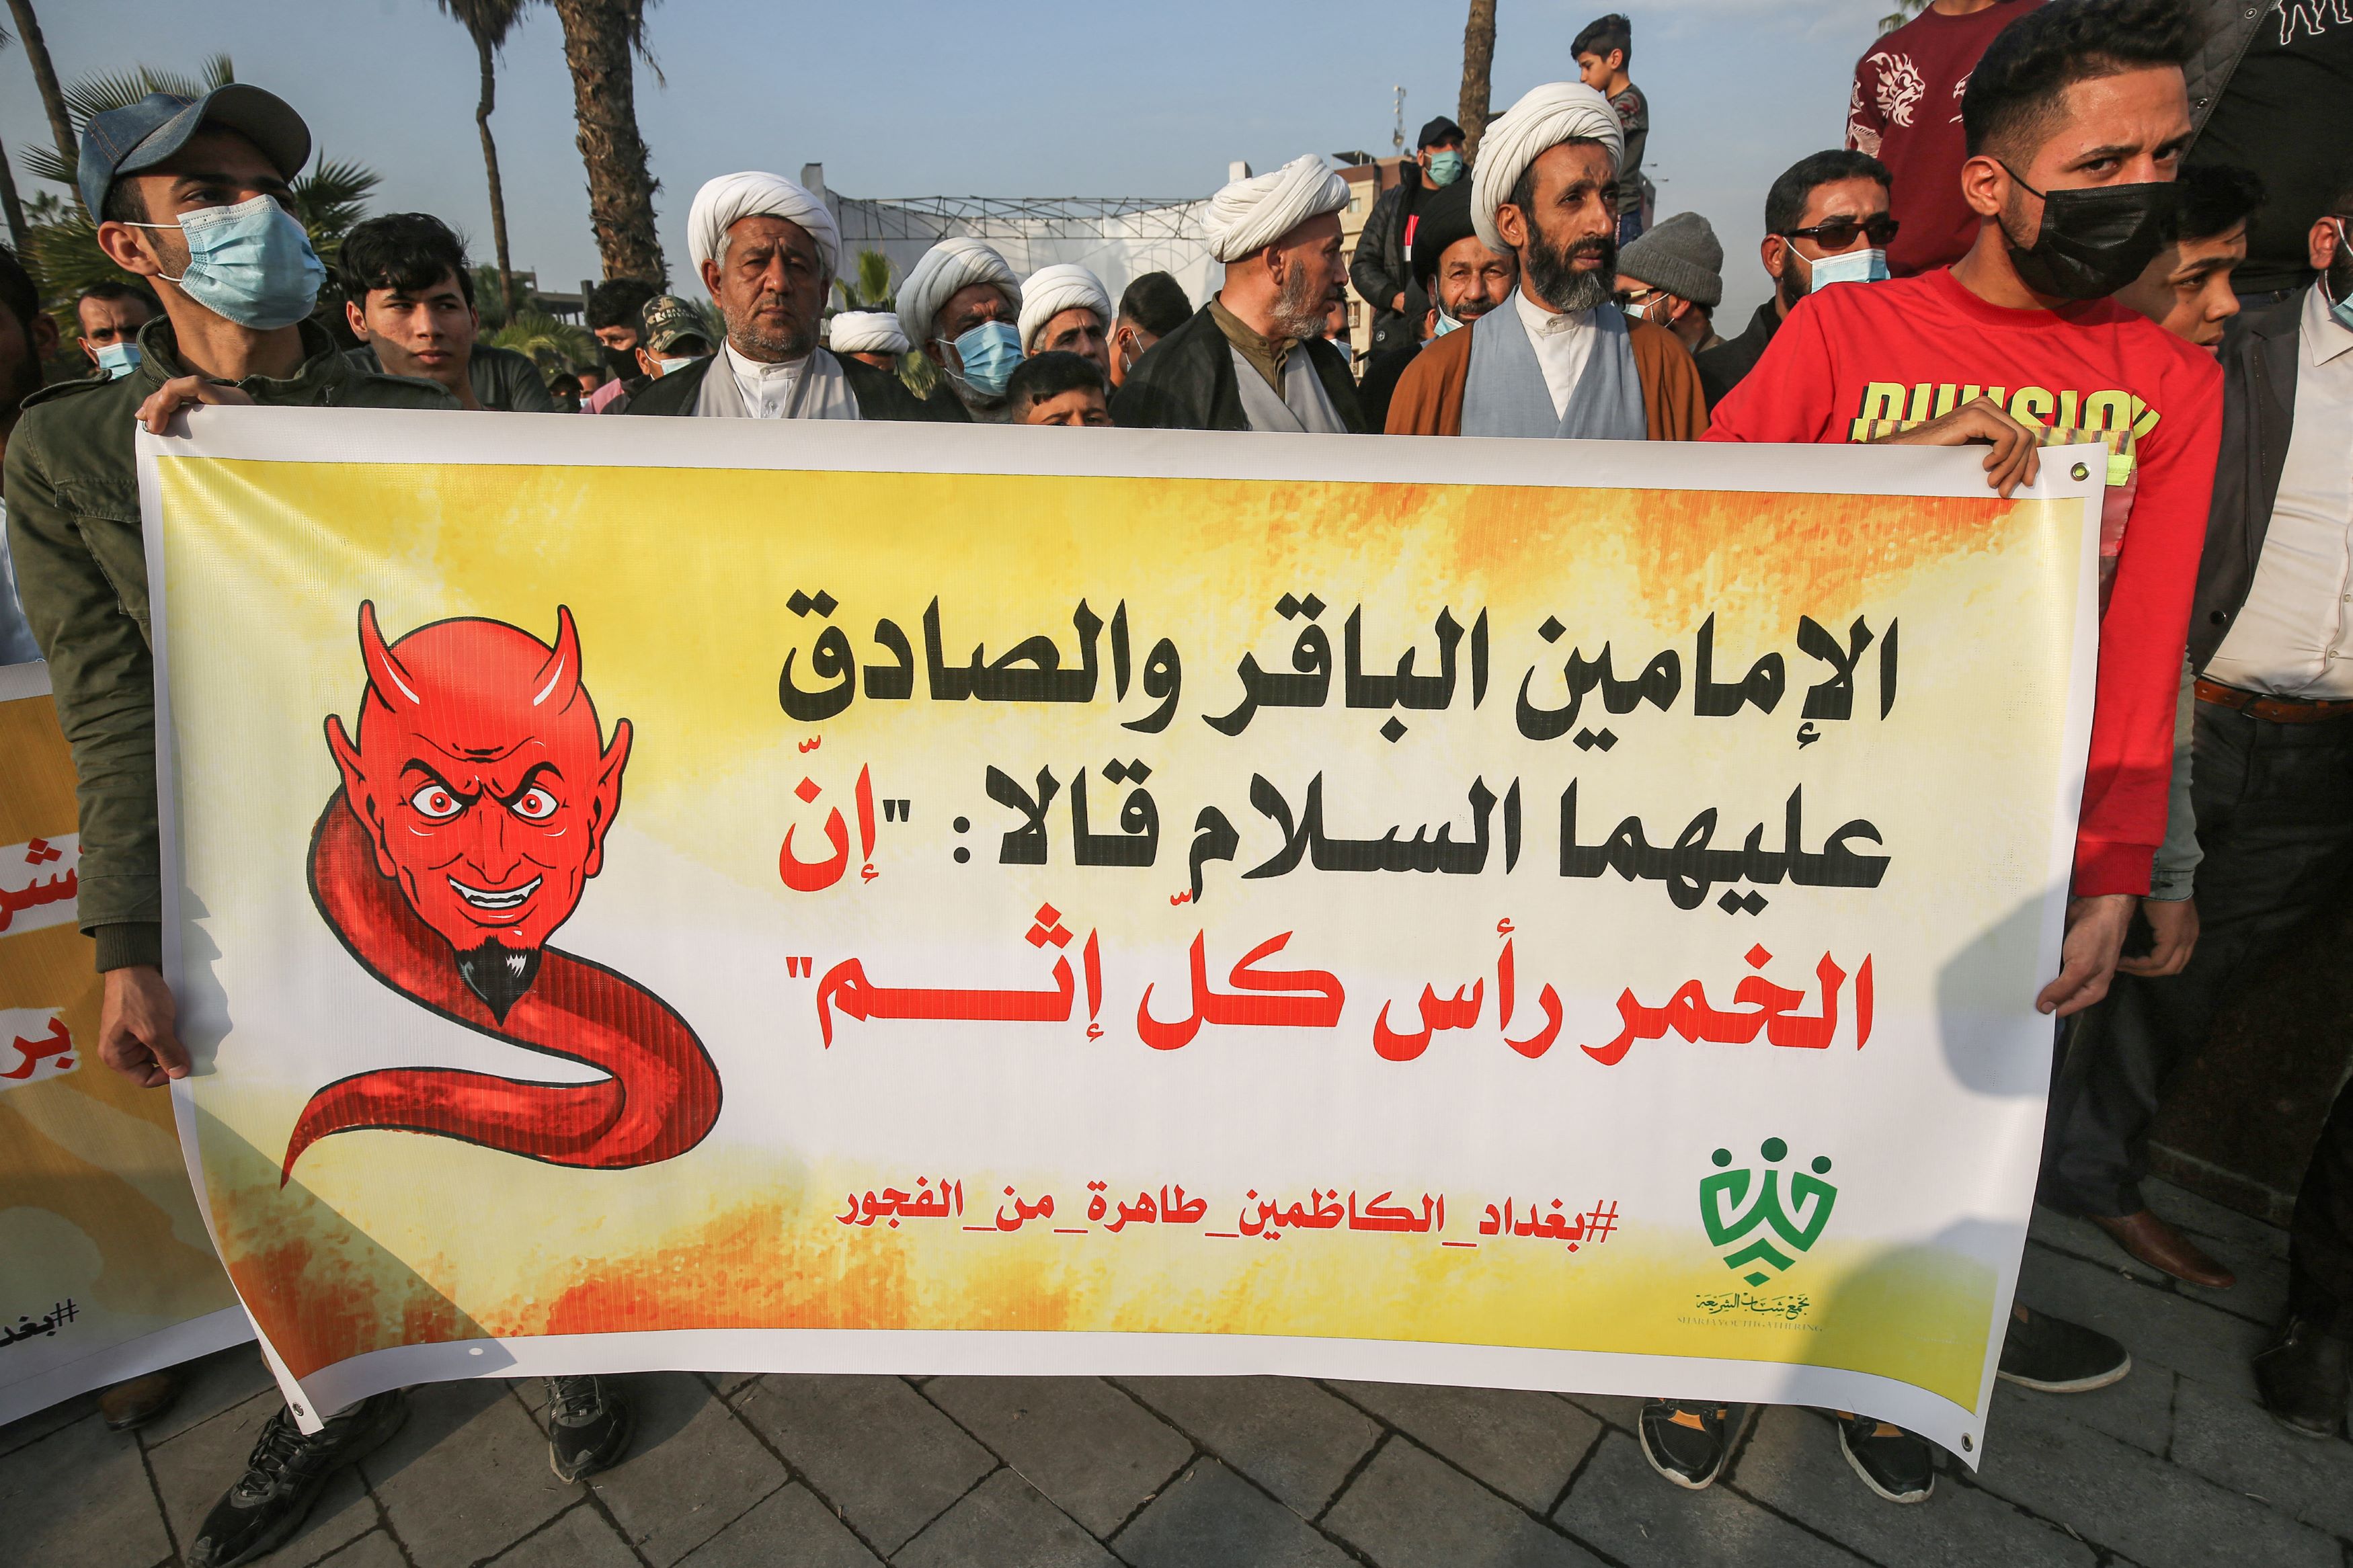 Shia Muslim clerics  march with a banner quoting Imams Baqir and Sadiq as saying that alcohol is the root of all sin, during a demonstration in Iraq's capital Baghdad (AFP)